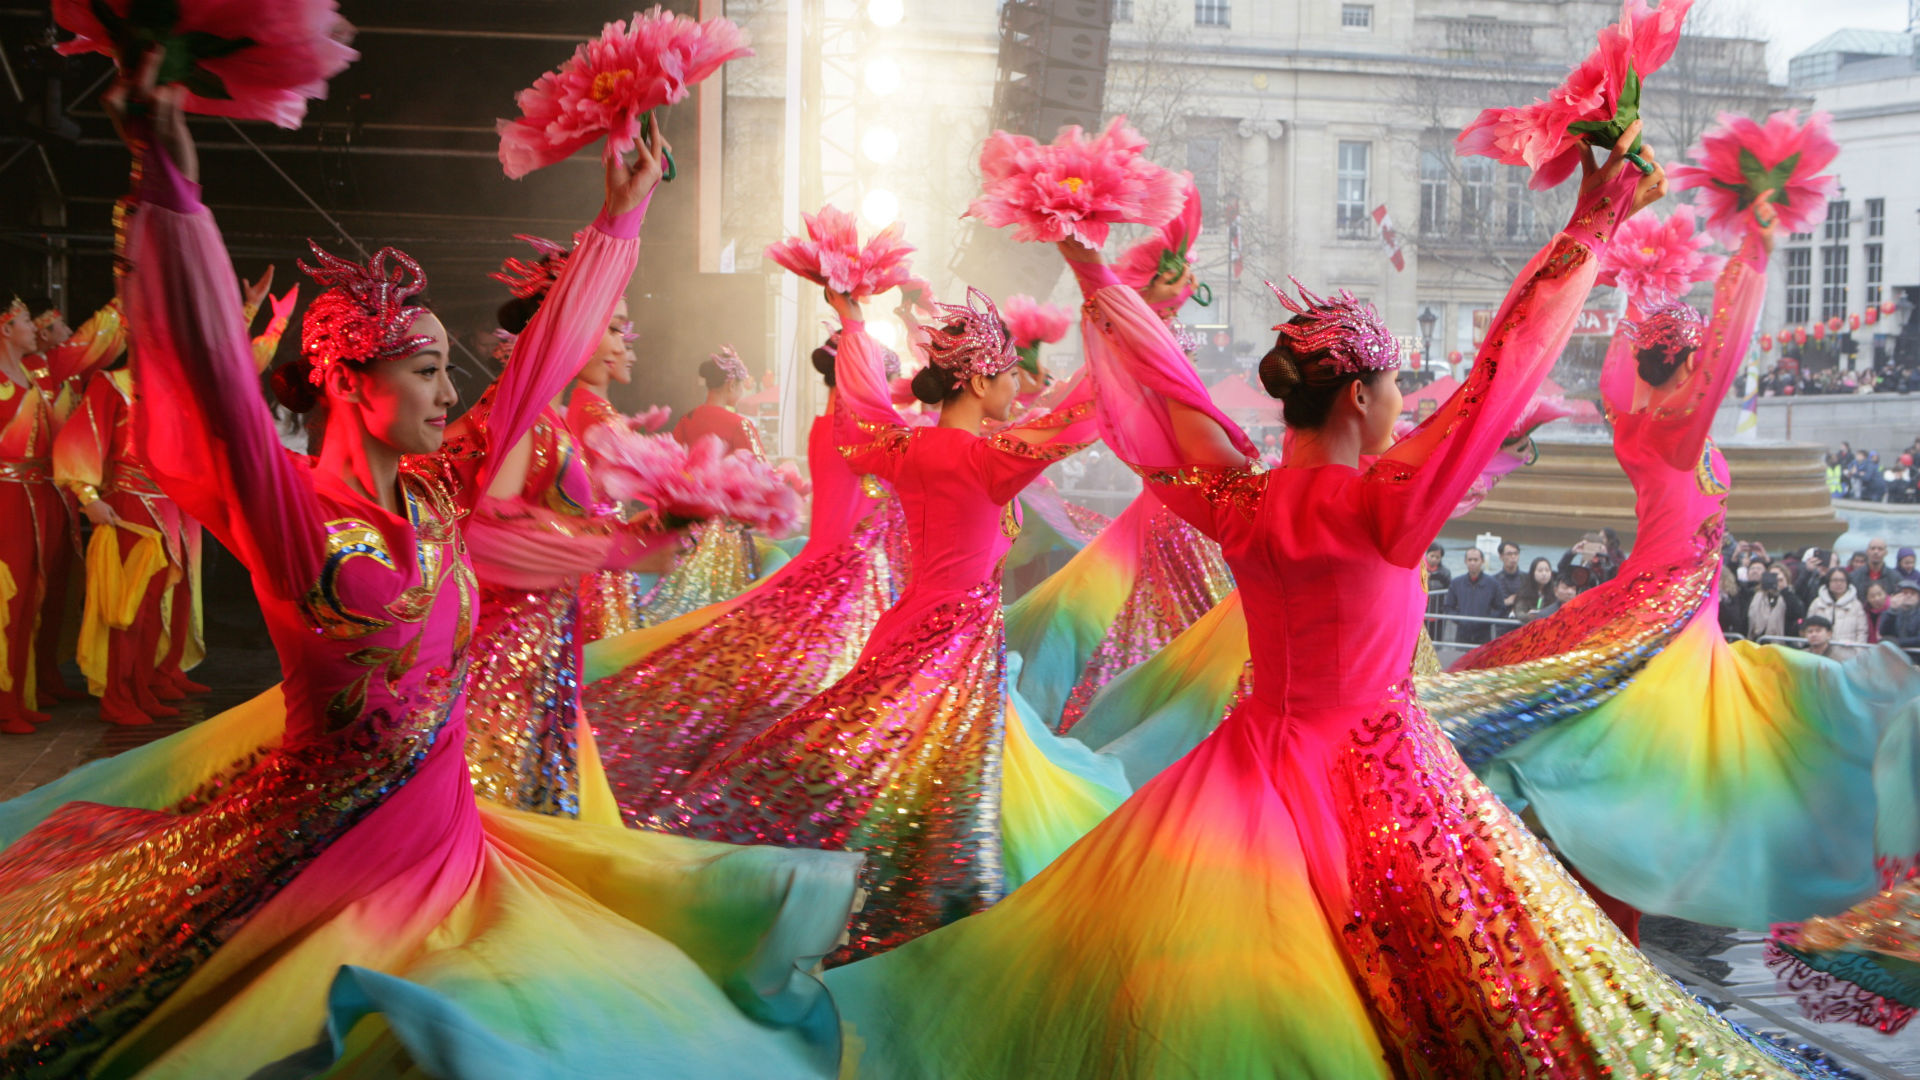 A group of brightly dressed dancers perform on a stage in front of crowds in Trafalgar Square during Chinese New Year in London